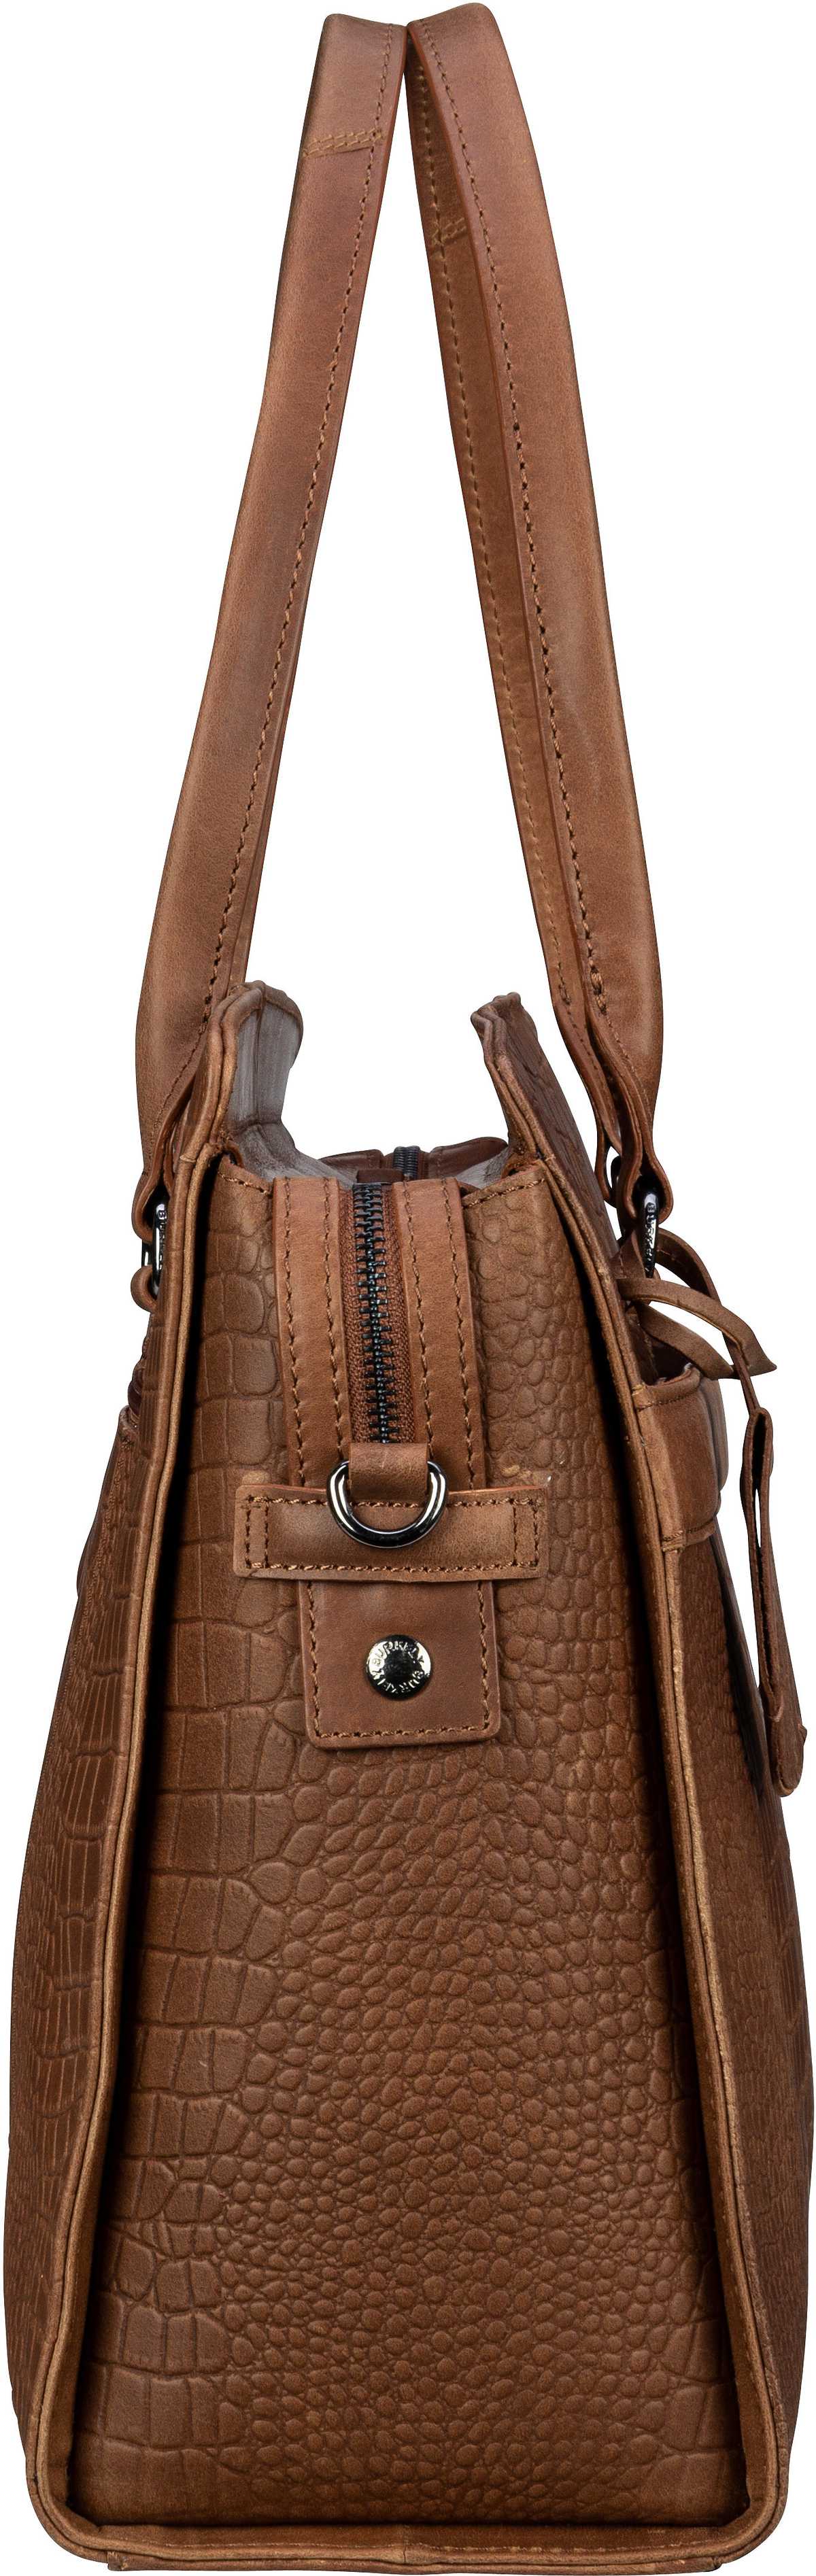 Burkely Casual Carly Workbag 15'' - Cognac